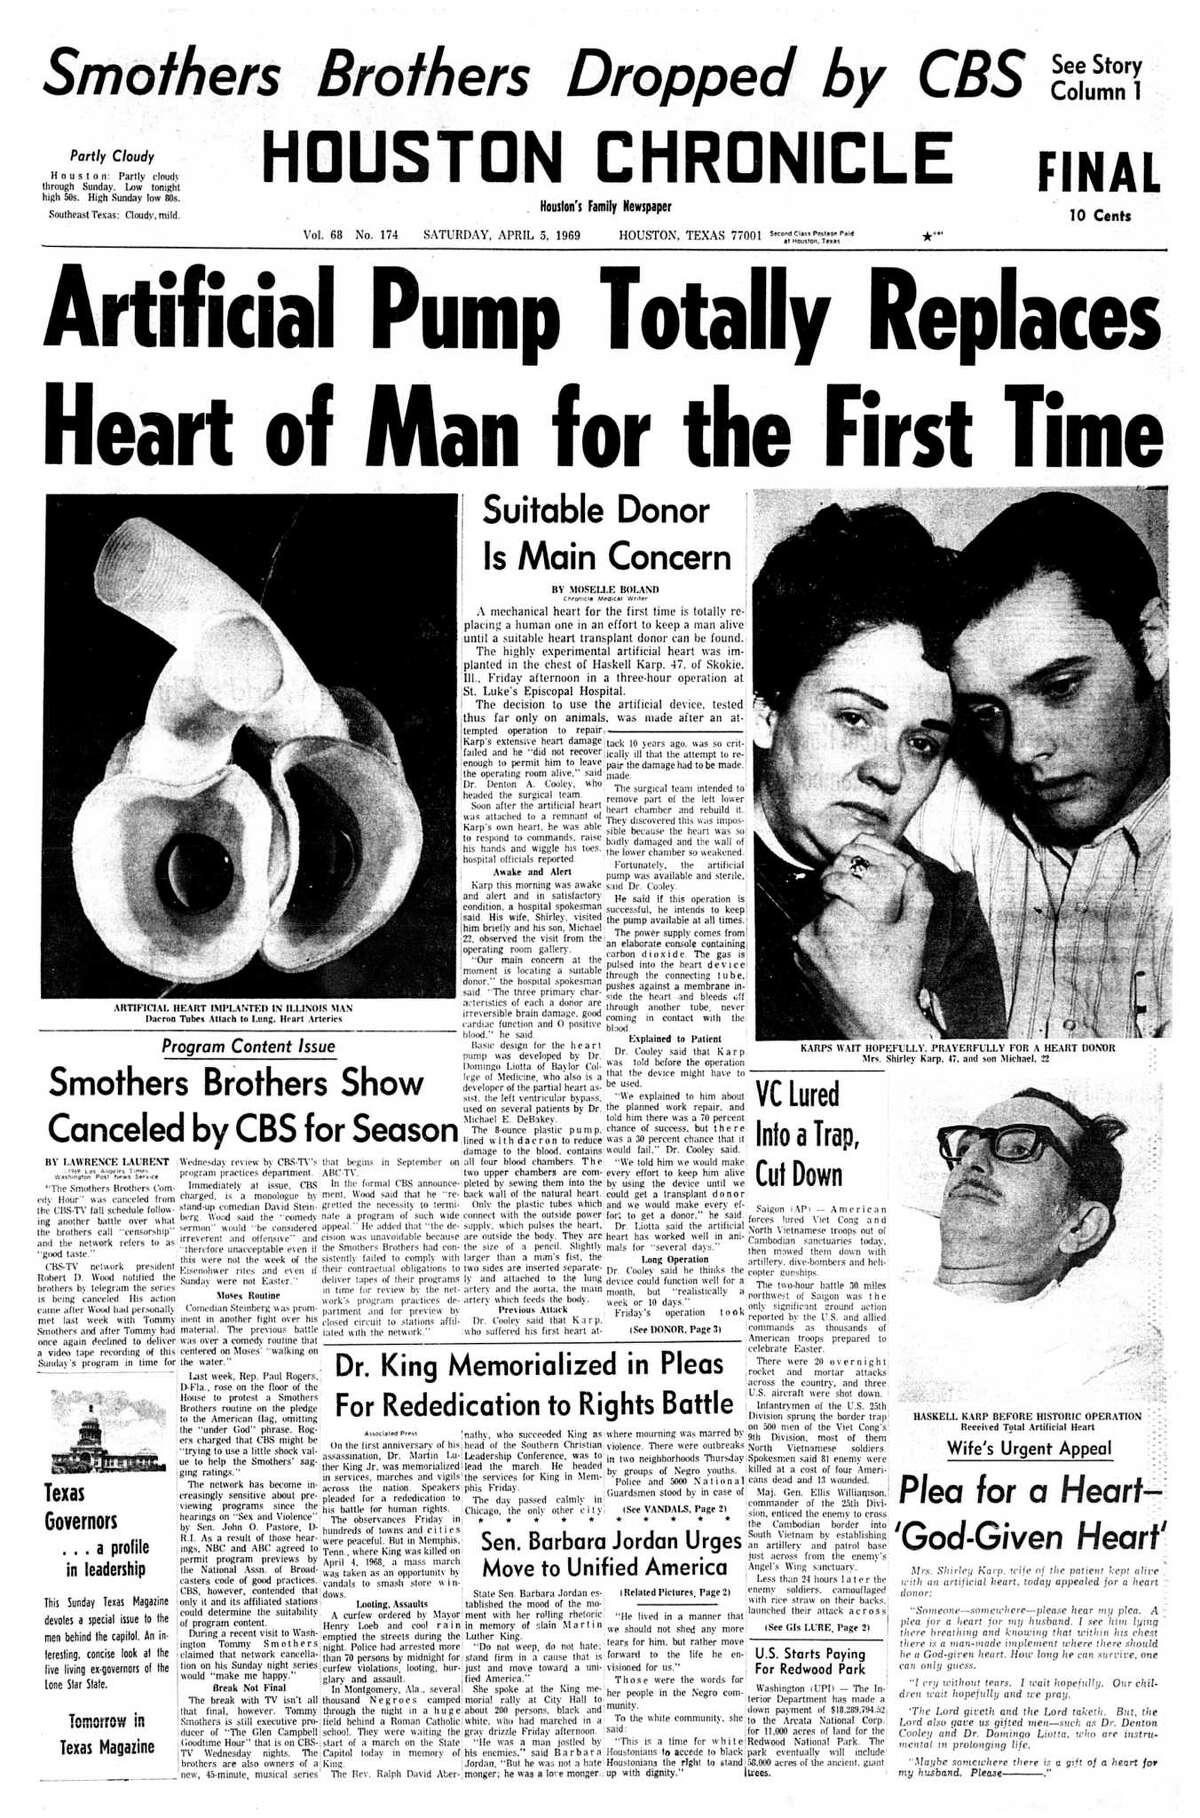 Houston Chronicle front page (HISTORIC) - April 5, 1969 - section 1, page 1.Â  Artificial Pump Totally Replaces Heart of Man for the First Time (Haskell Karp)